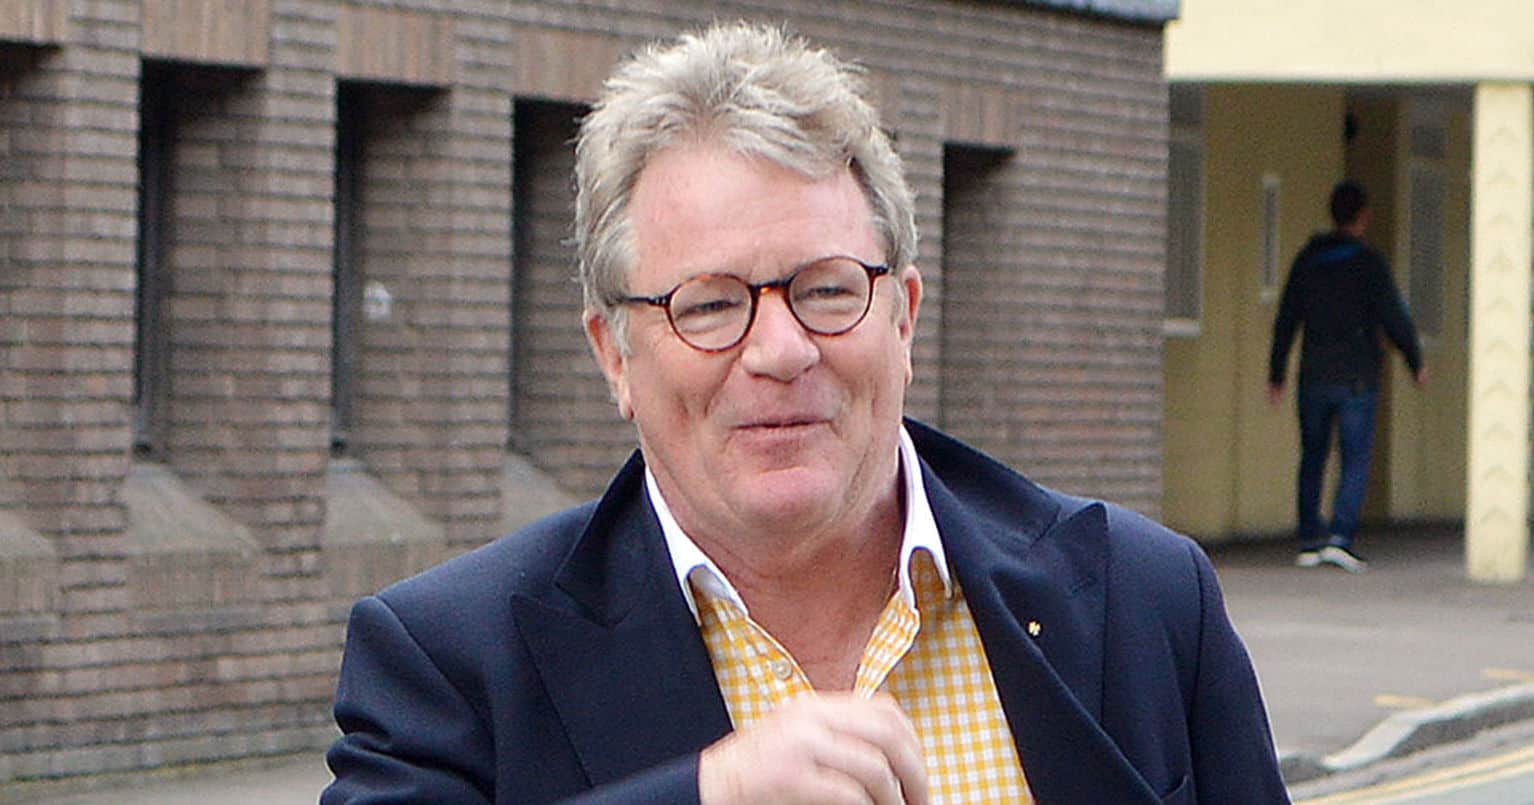 Watch – Reactions as Jim Davidson publishes video titled ‘There’s no black in the Union Jack’